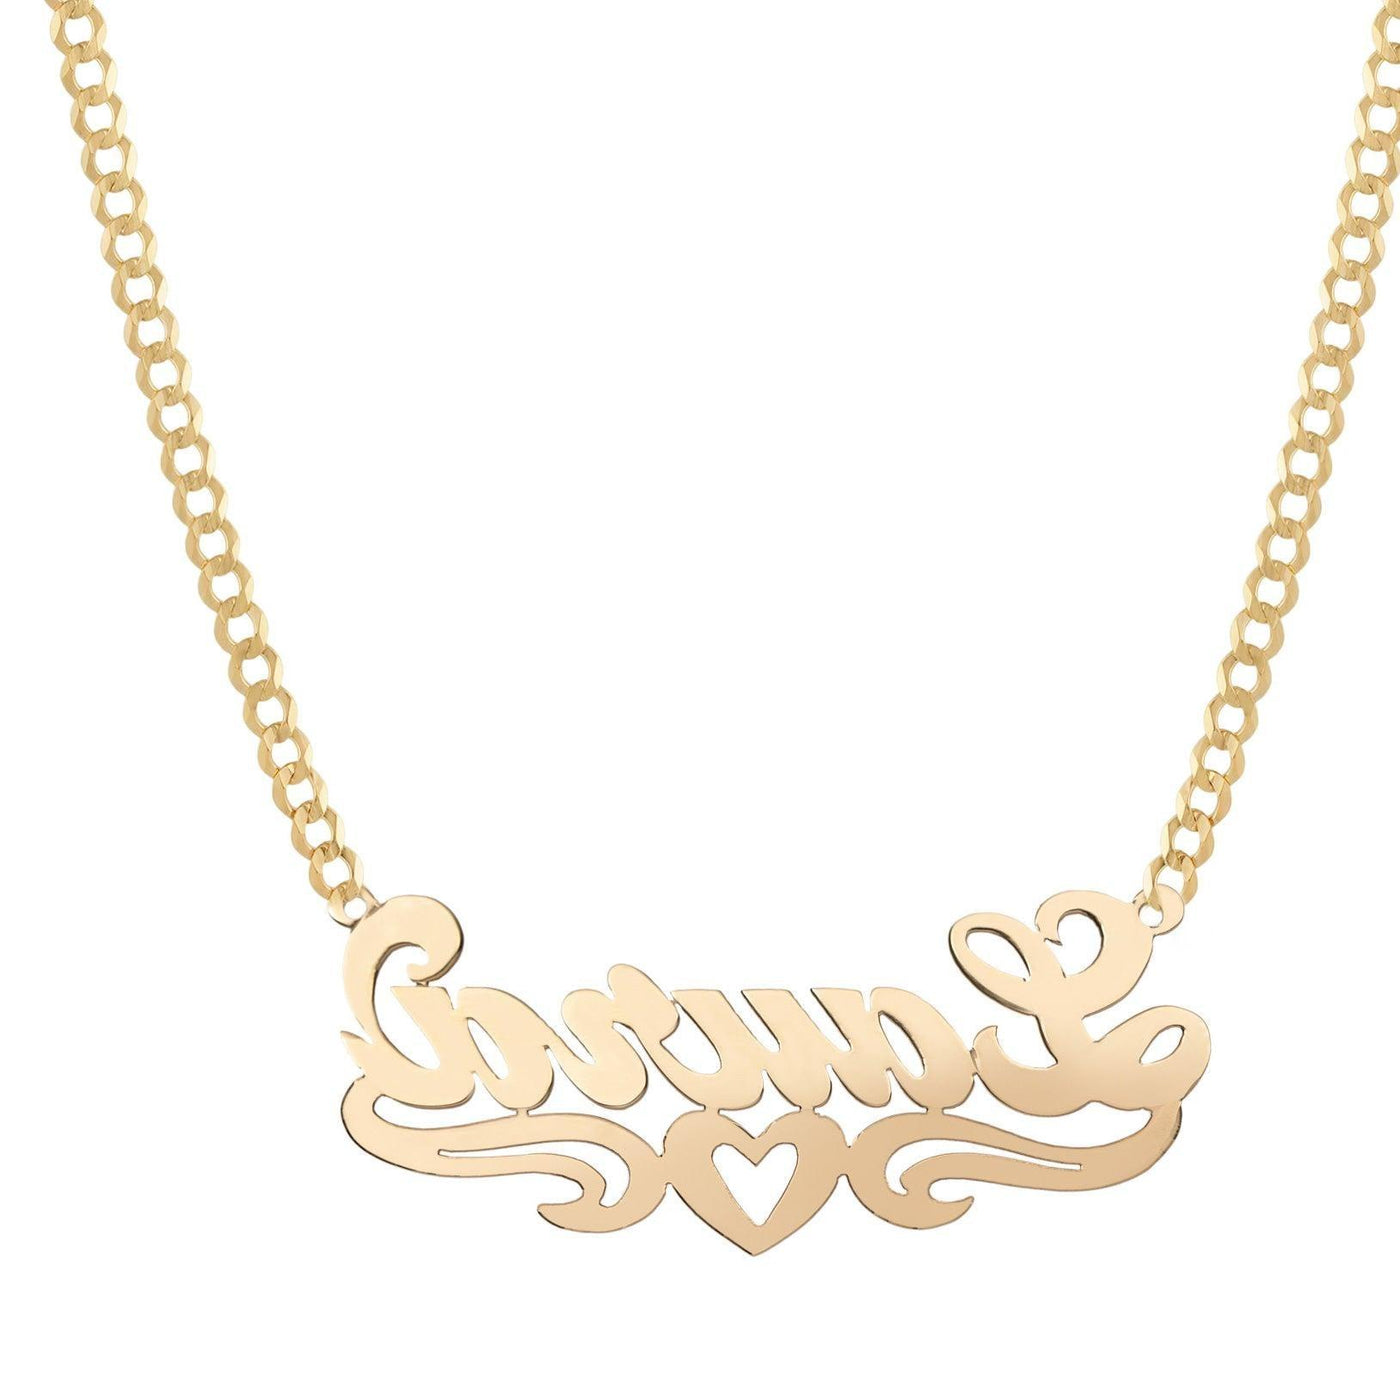 Ladies Script Name Plate Heart Ribbon Necklace 14K Gold - Style 112 - bayamjewelry